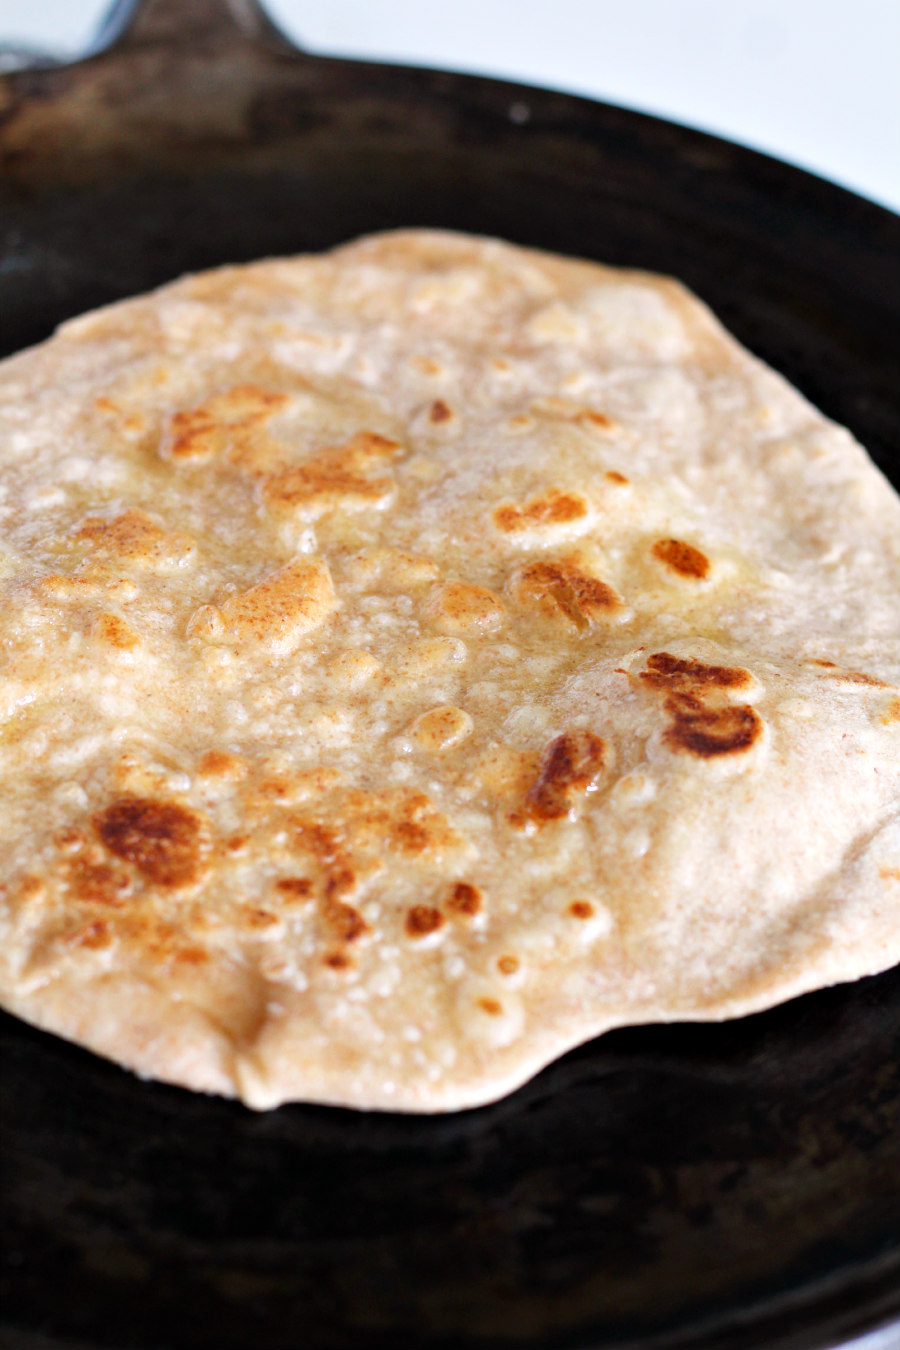 Homemade tortilla being cooked on cast iron griddle pan on stovetop.